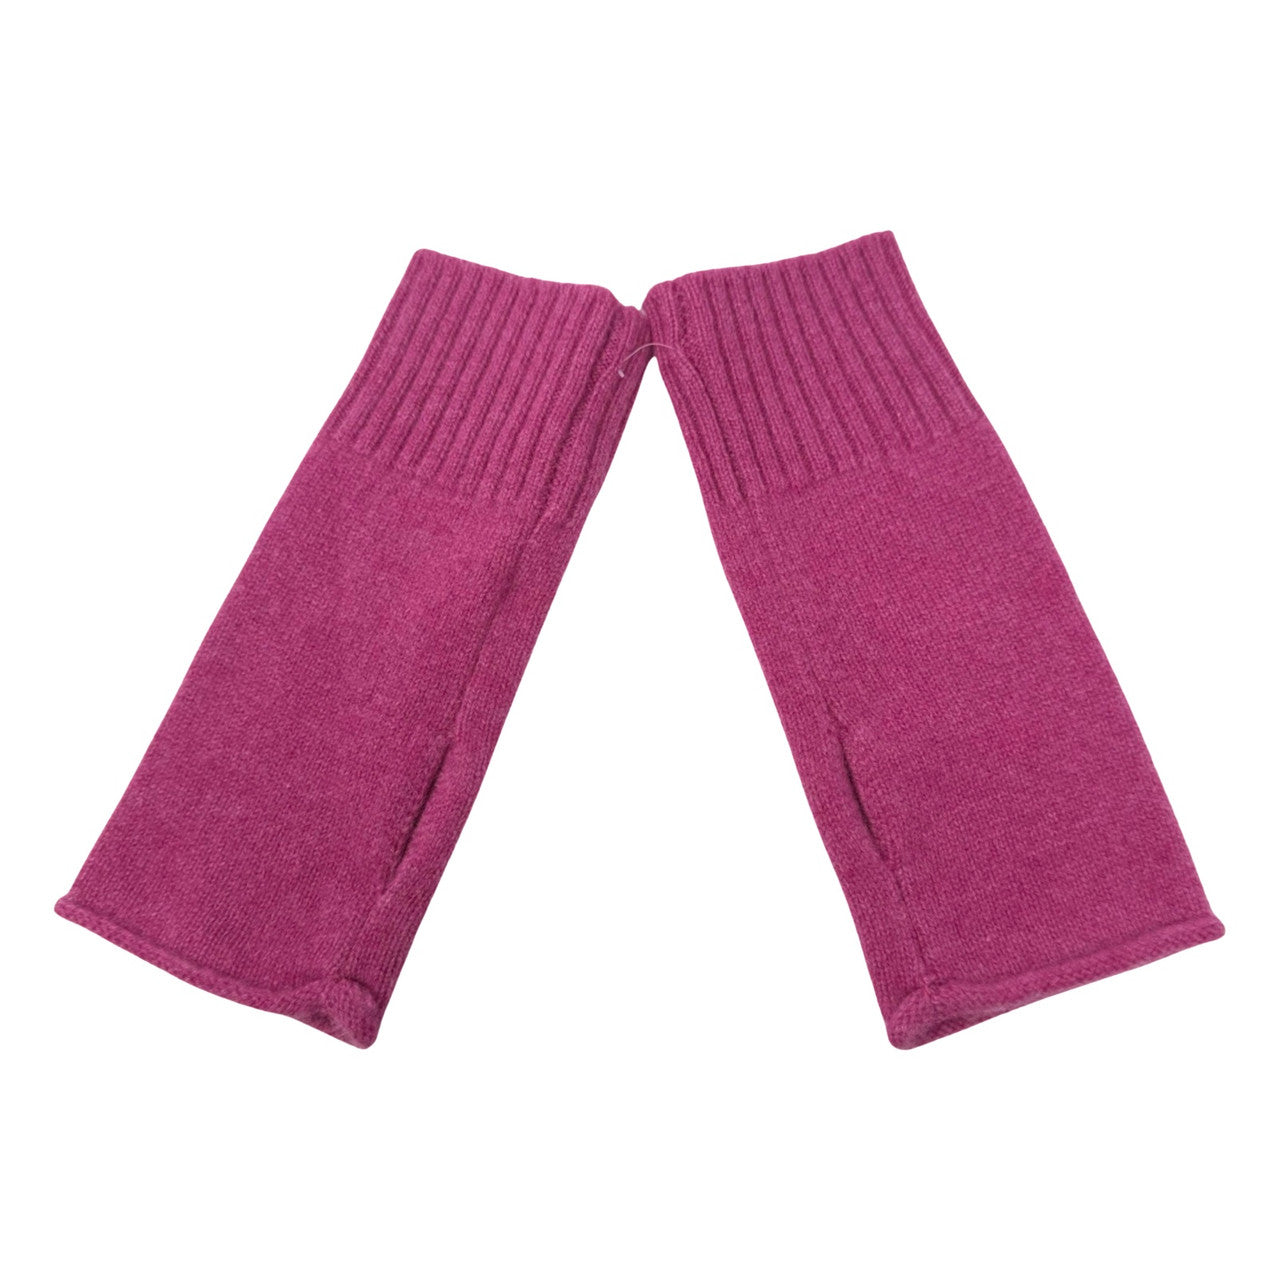 The Cashmere Project Basic Fingerless Glove-Pink front